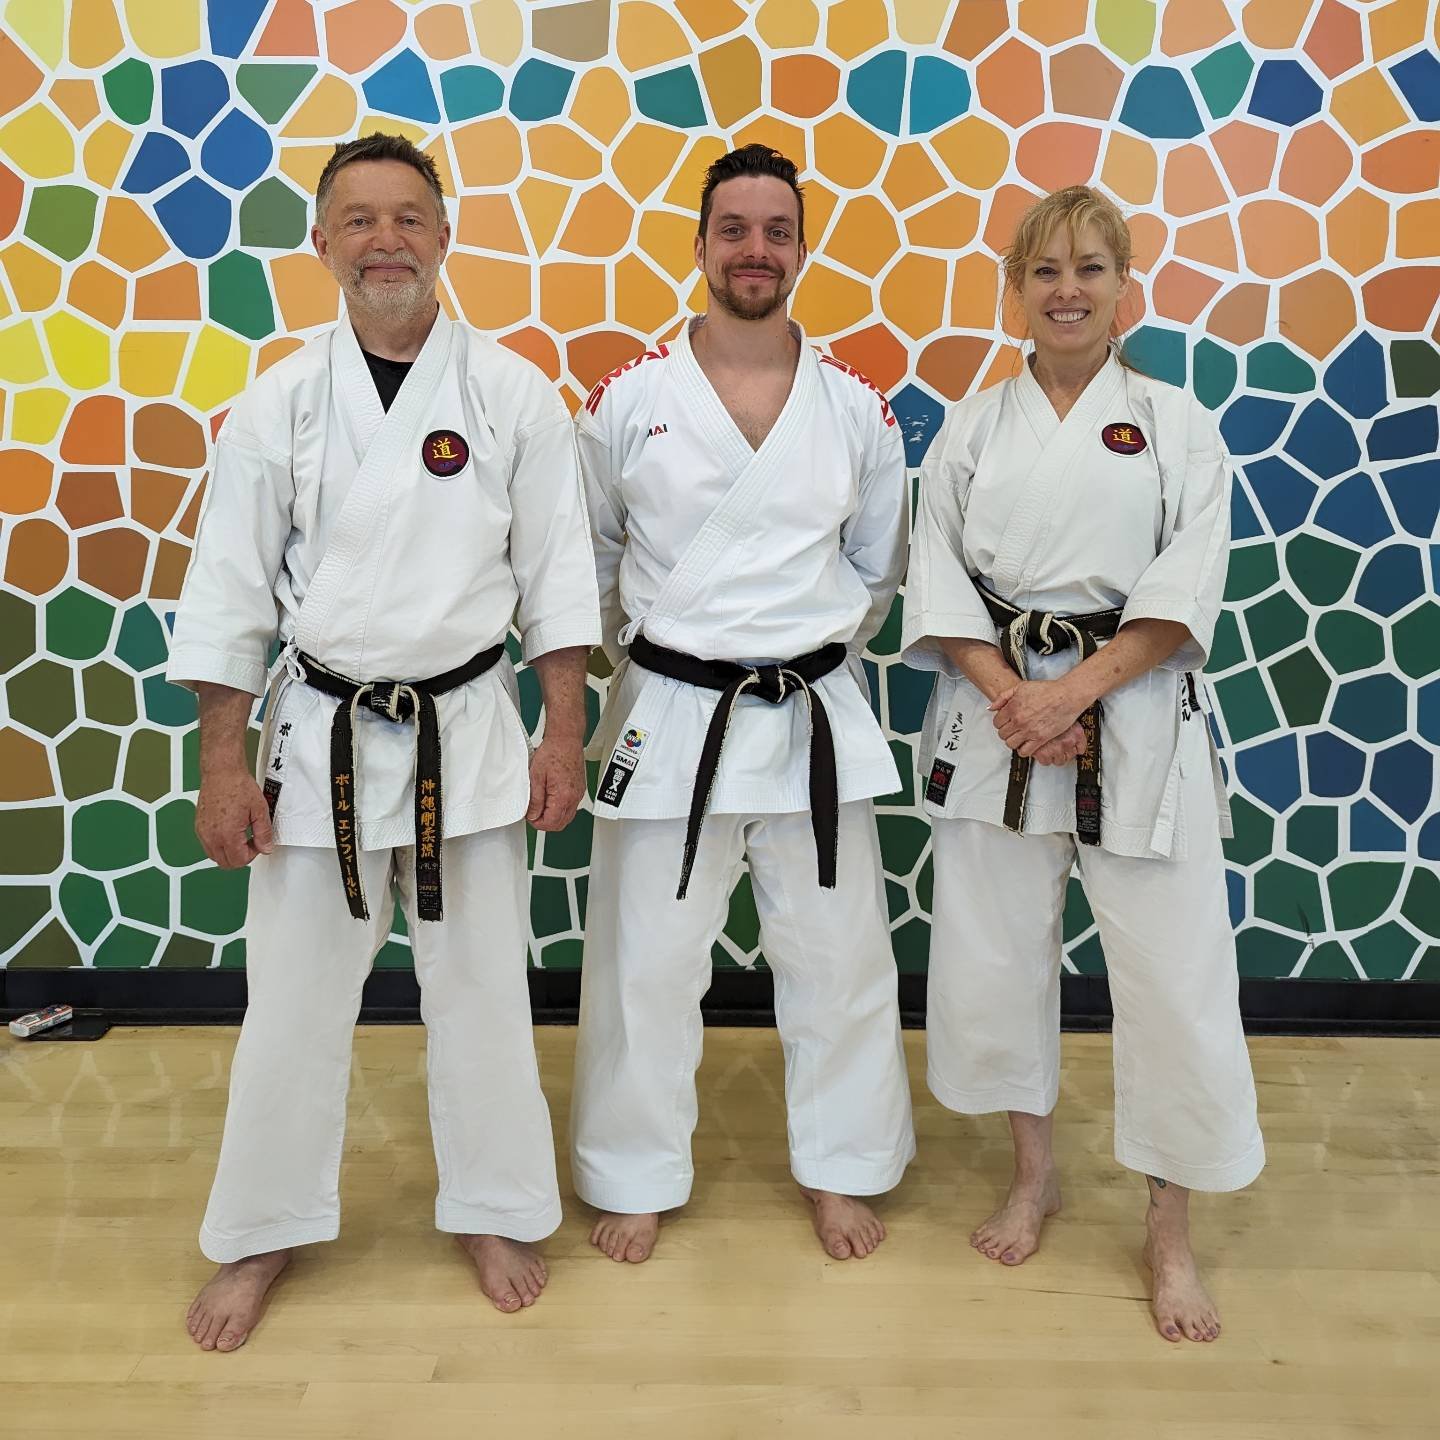 1ST GKC GLOBAL KARATE BY THE SEA 3 DAY SEMINAR
.
Fantastic Goju Ryu Karate training with amazing instructors @gkcglobal Sensei Paul Enfield and Sensei Michelle Enfield. Had a blast training with my friends Sensei Jonathan Kenney and his group from To